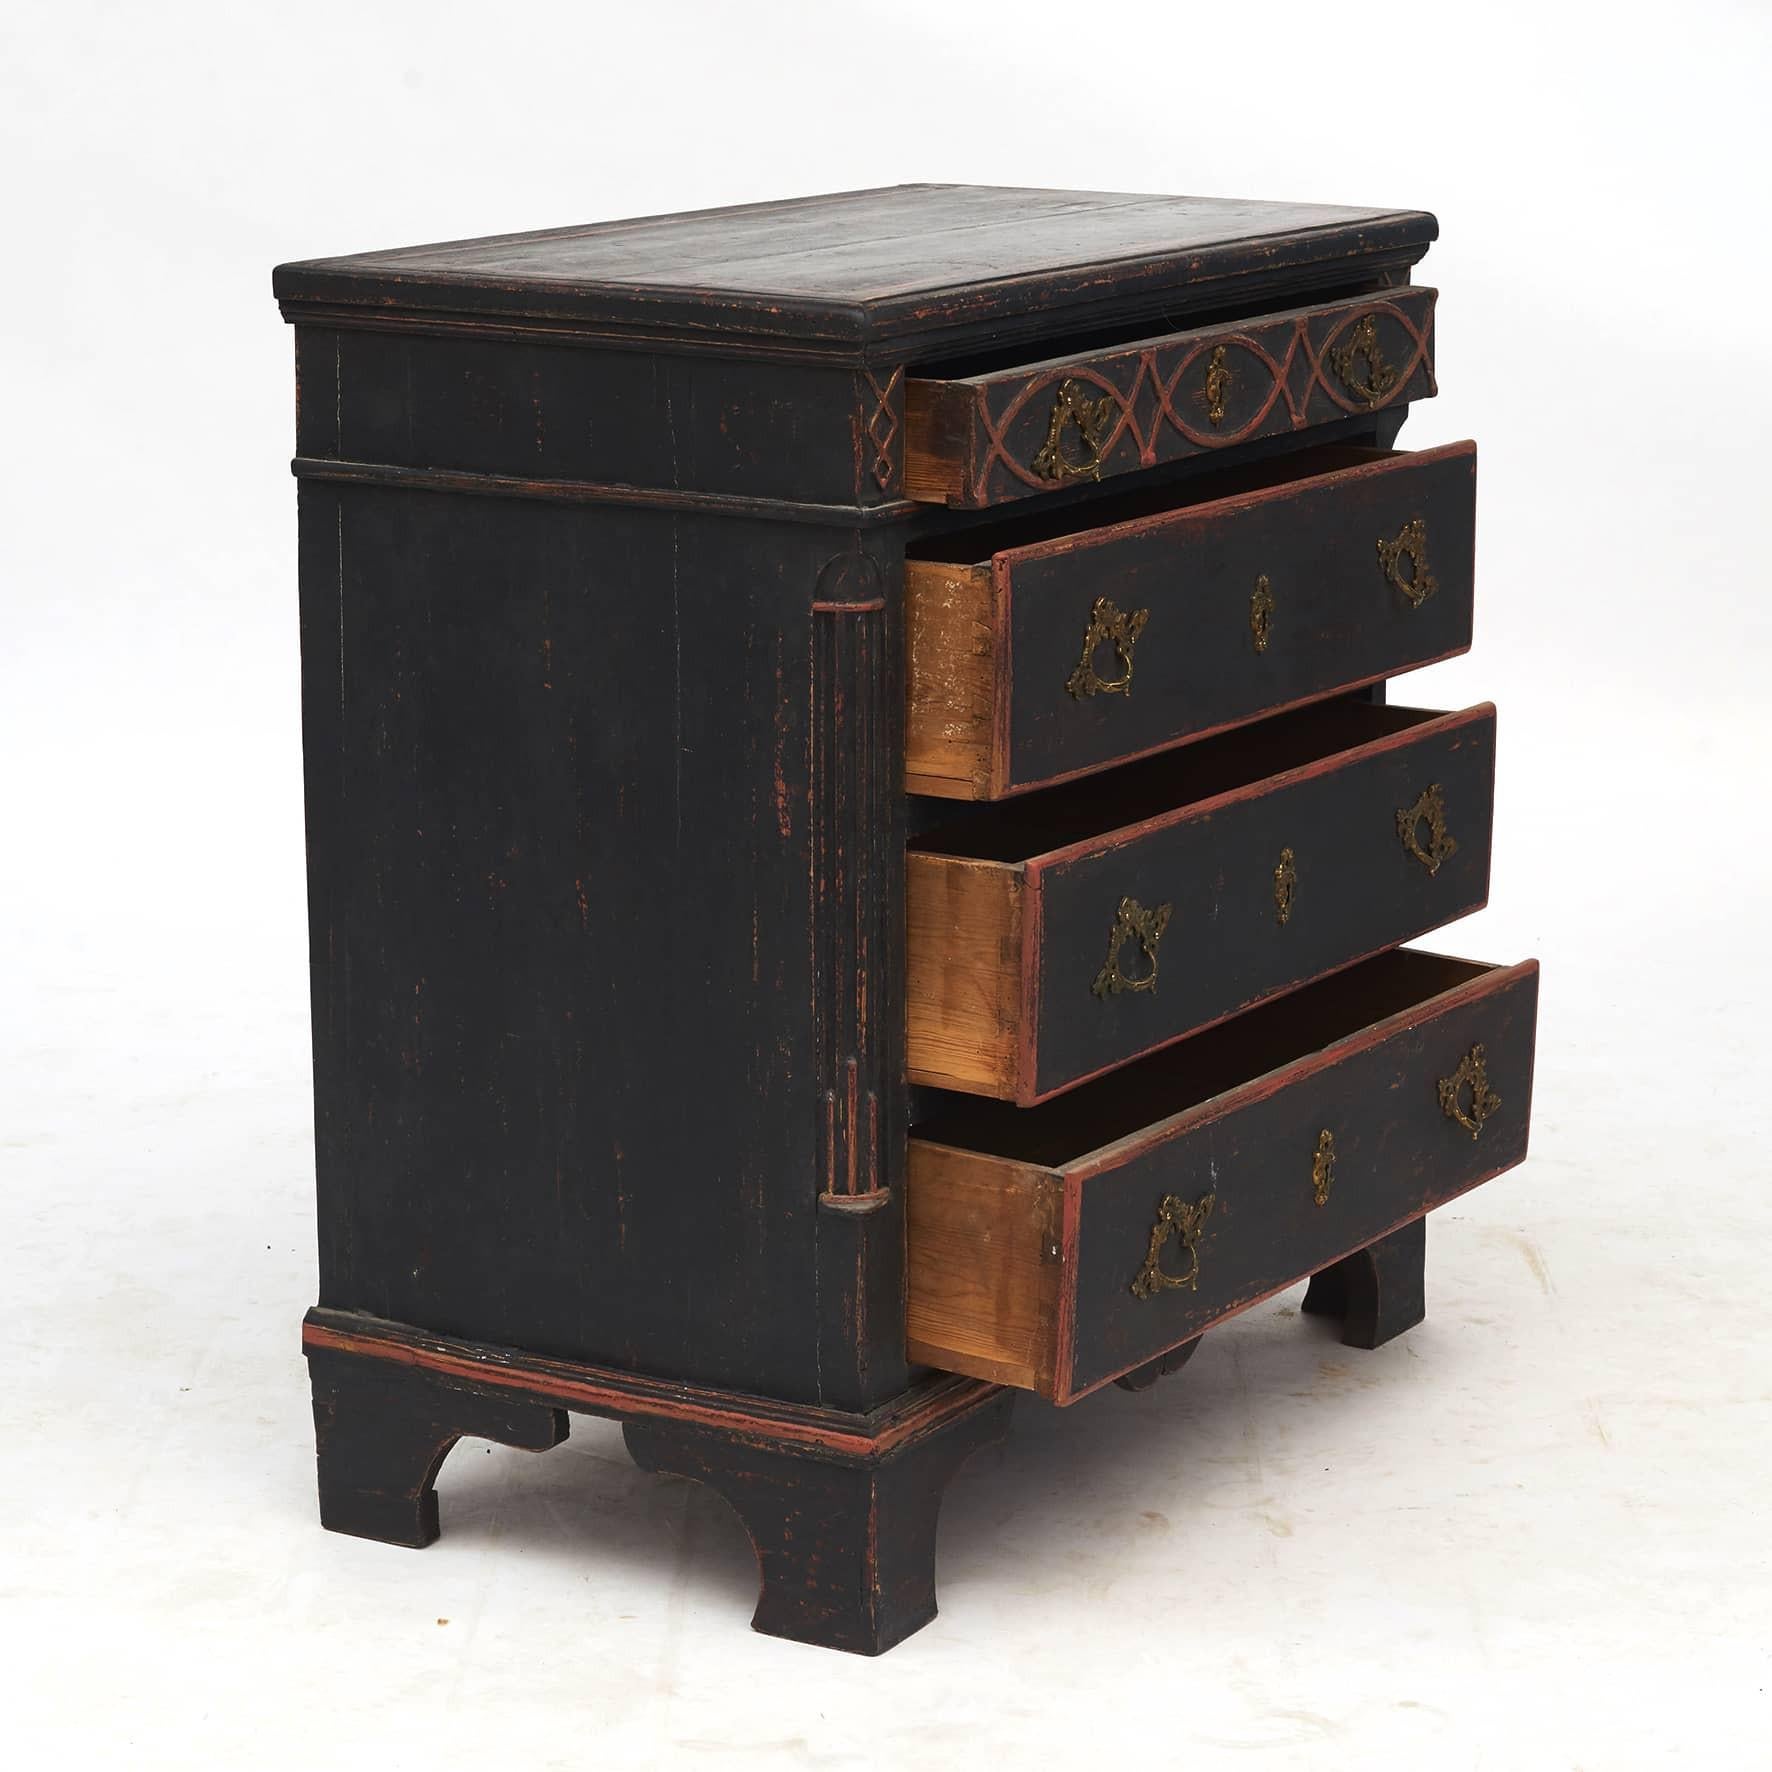 Louis XVI chest of drawers with original paint.
The chest has four drawers: top drawer with playful geometric carved mouldings, the three drawers below have mouldings running along the drawer edge. Flanking quarter columns.
A beautiful chest of